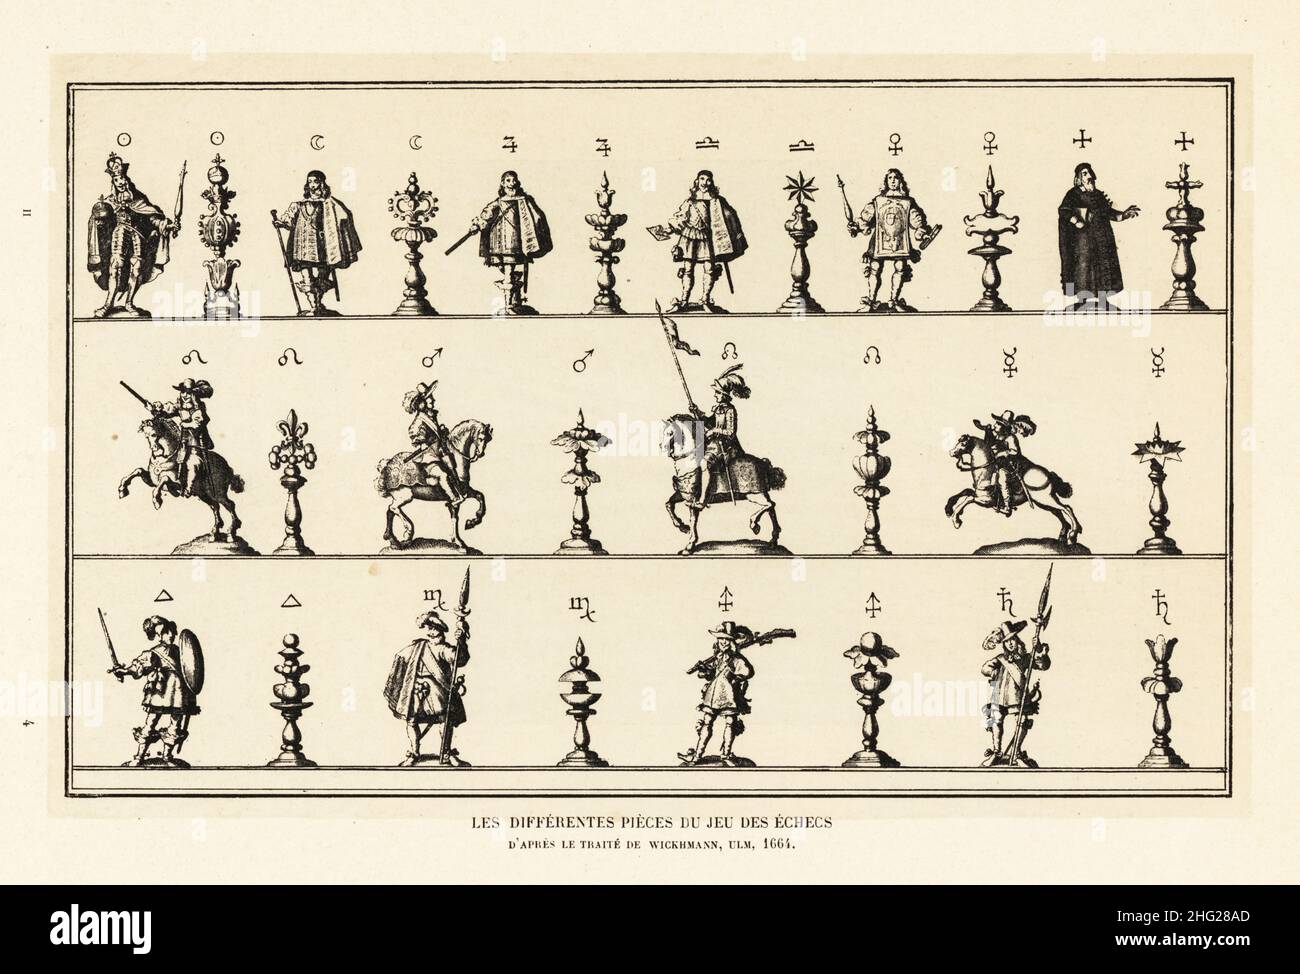 Chess pieces from the 17th century. King, knight, bishop, pawn, etc. Les differentes pieces du jeu des echecs. Engraving from New-erfundenes Grosses Konigs-Spiel by Christoph Weickhmann, Ulm, 1664. Lithograph from Henry Rene d’Allemagne’s Recreations et Passe-Temps, Games and Pastimes, Hachette, Paris, 1906. Stock Photo